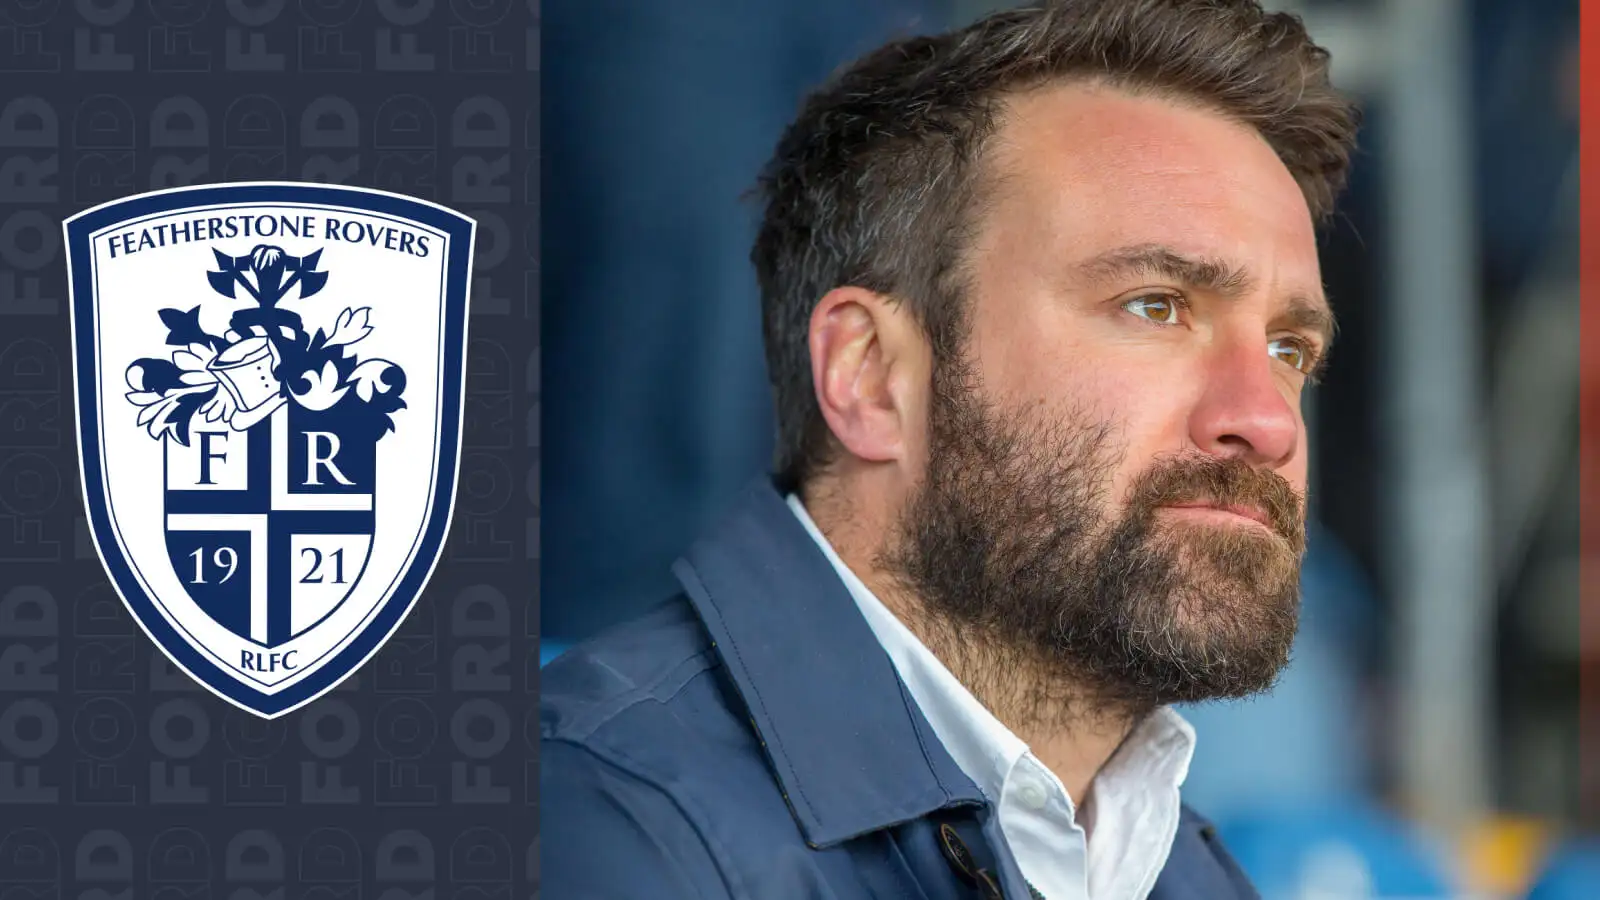 Featherstone Rovers boss James Ford recruits ‘powerful prop’ who was previously on books at Wakefield Trinity